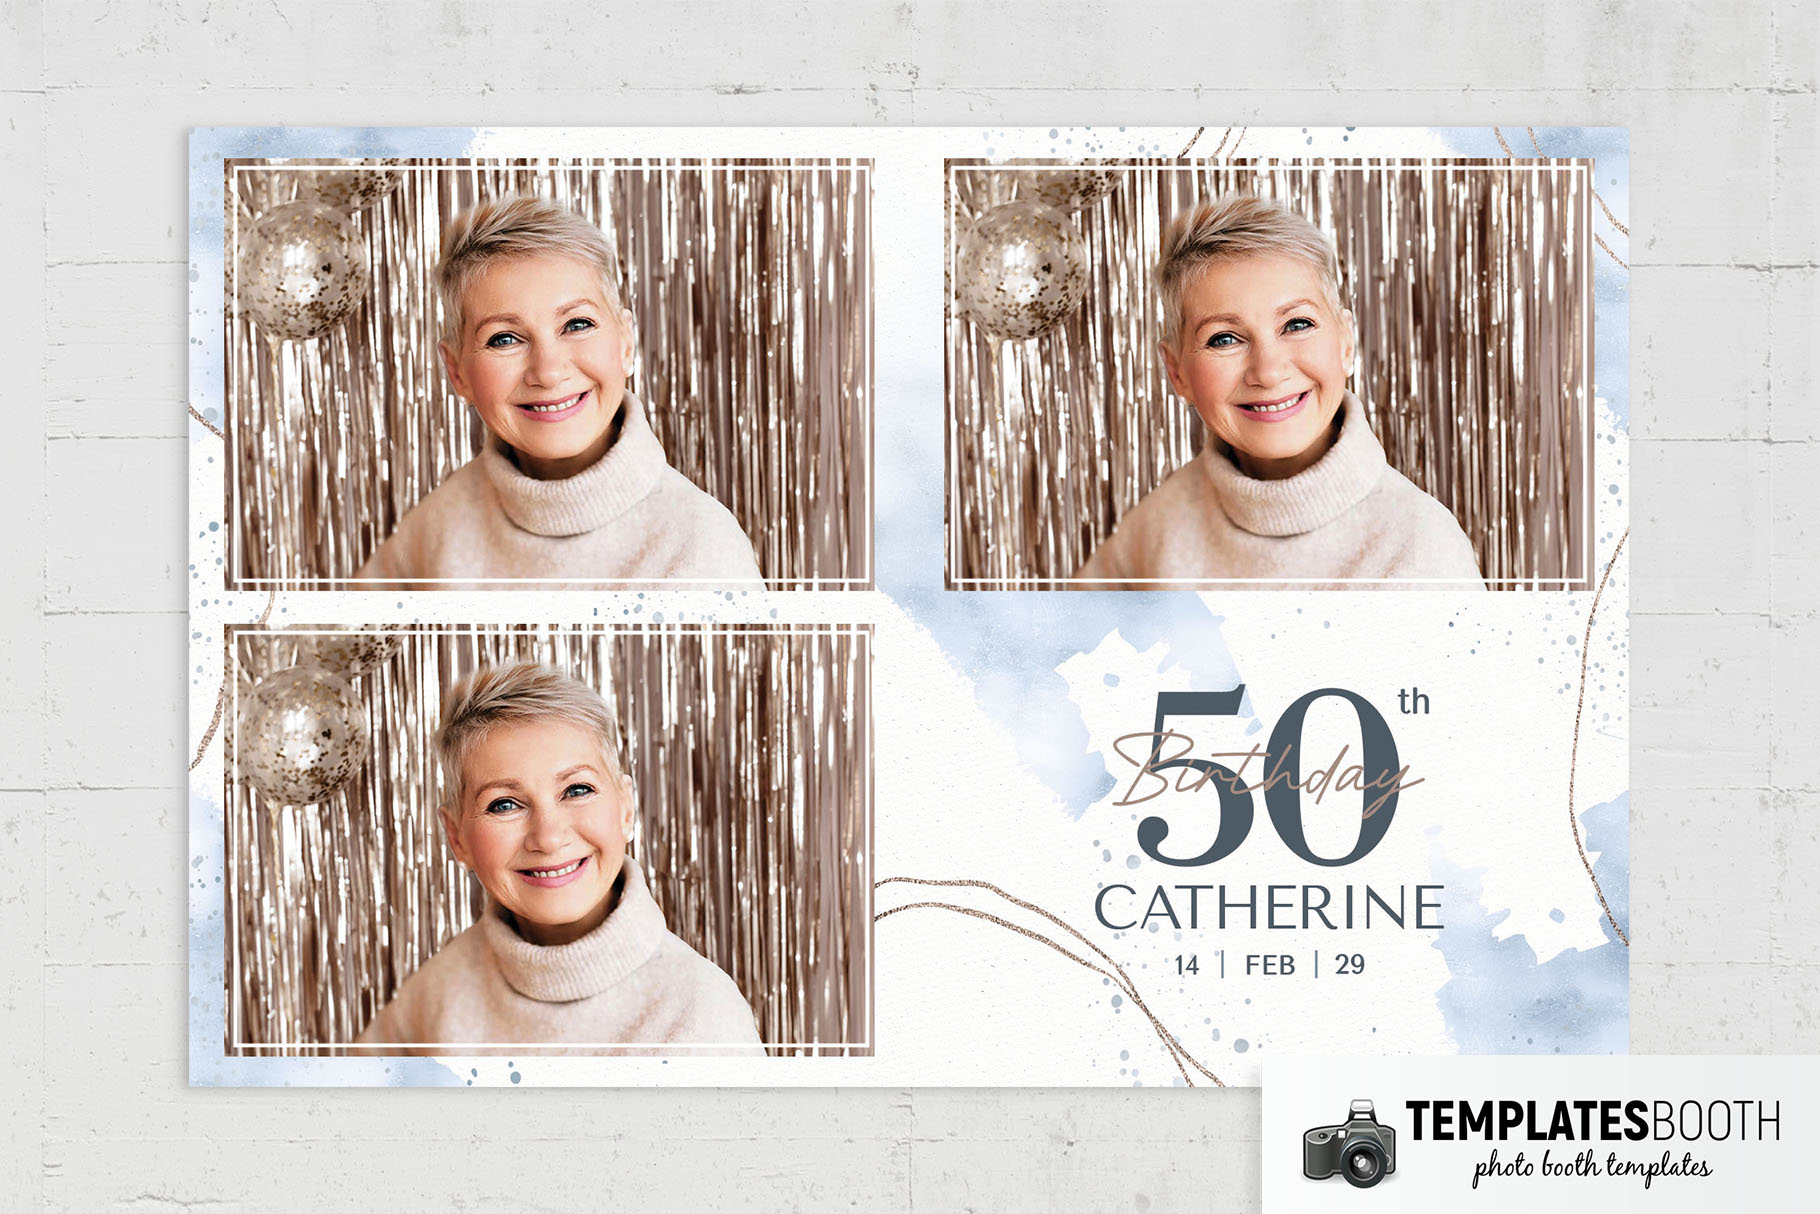 50th Birthday Photo Booth Template